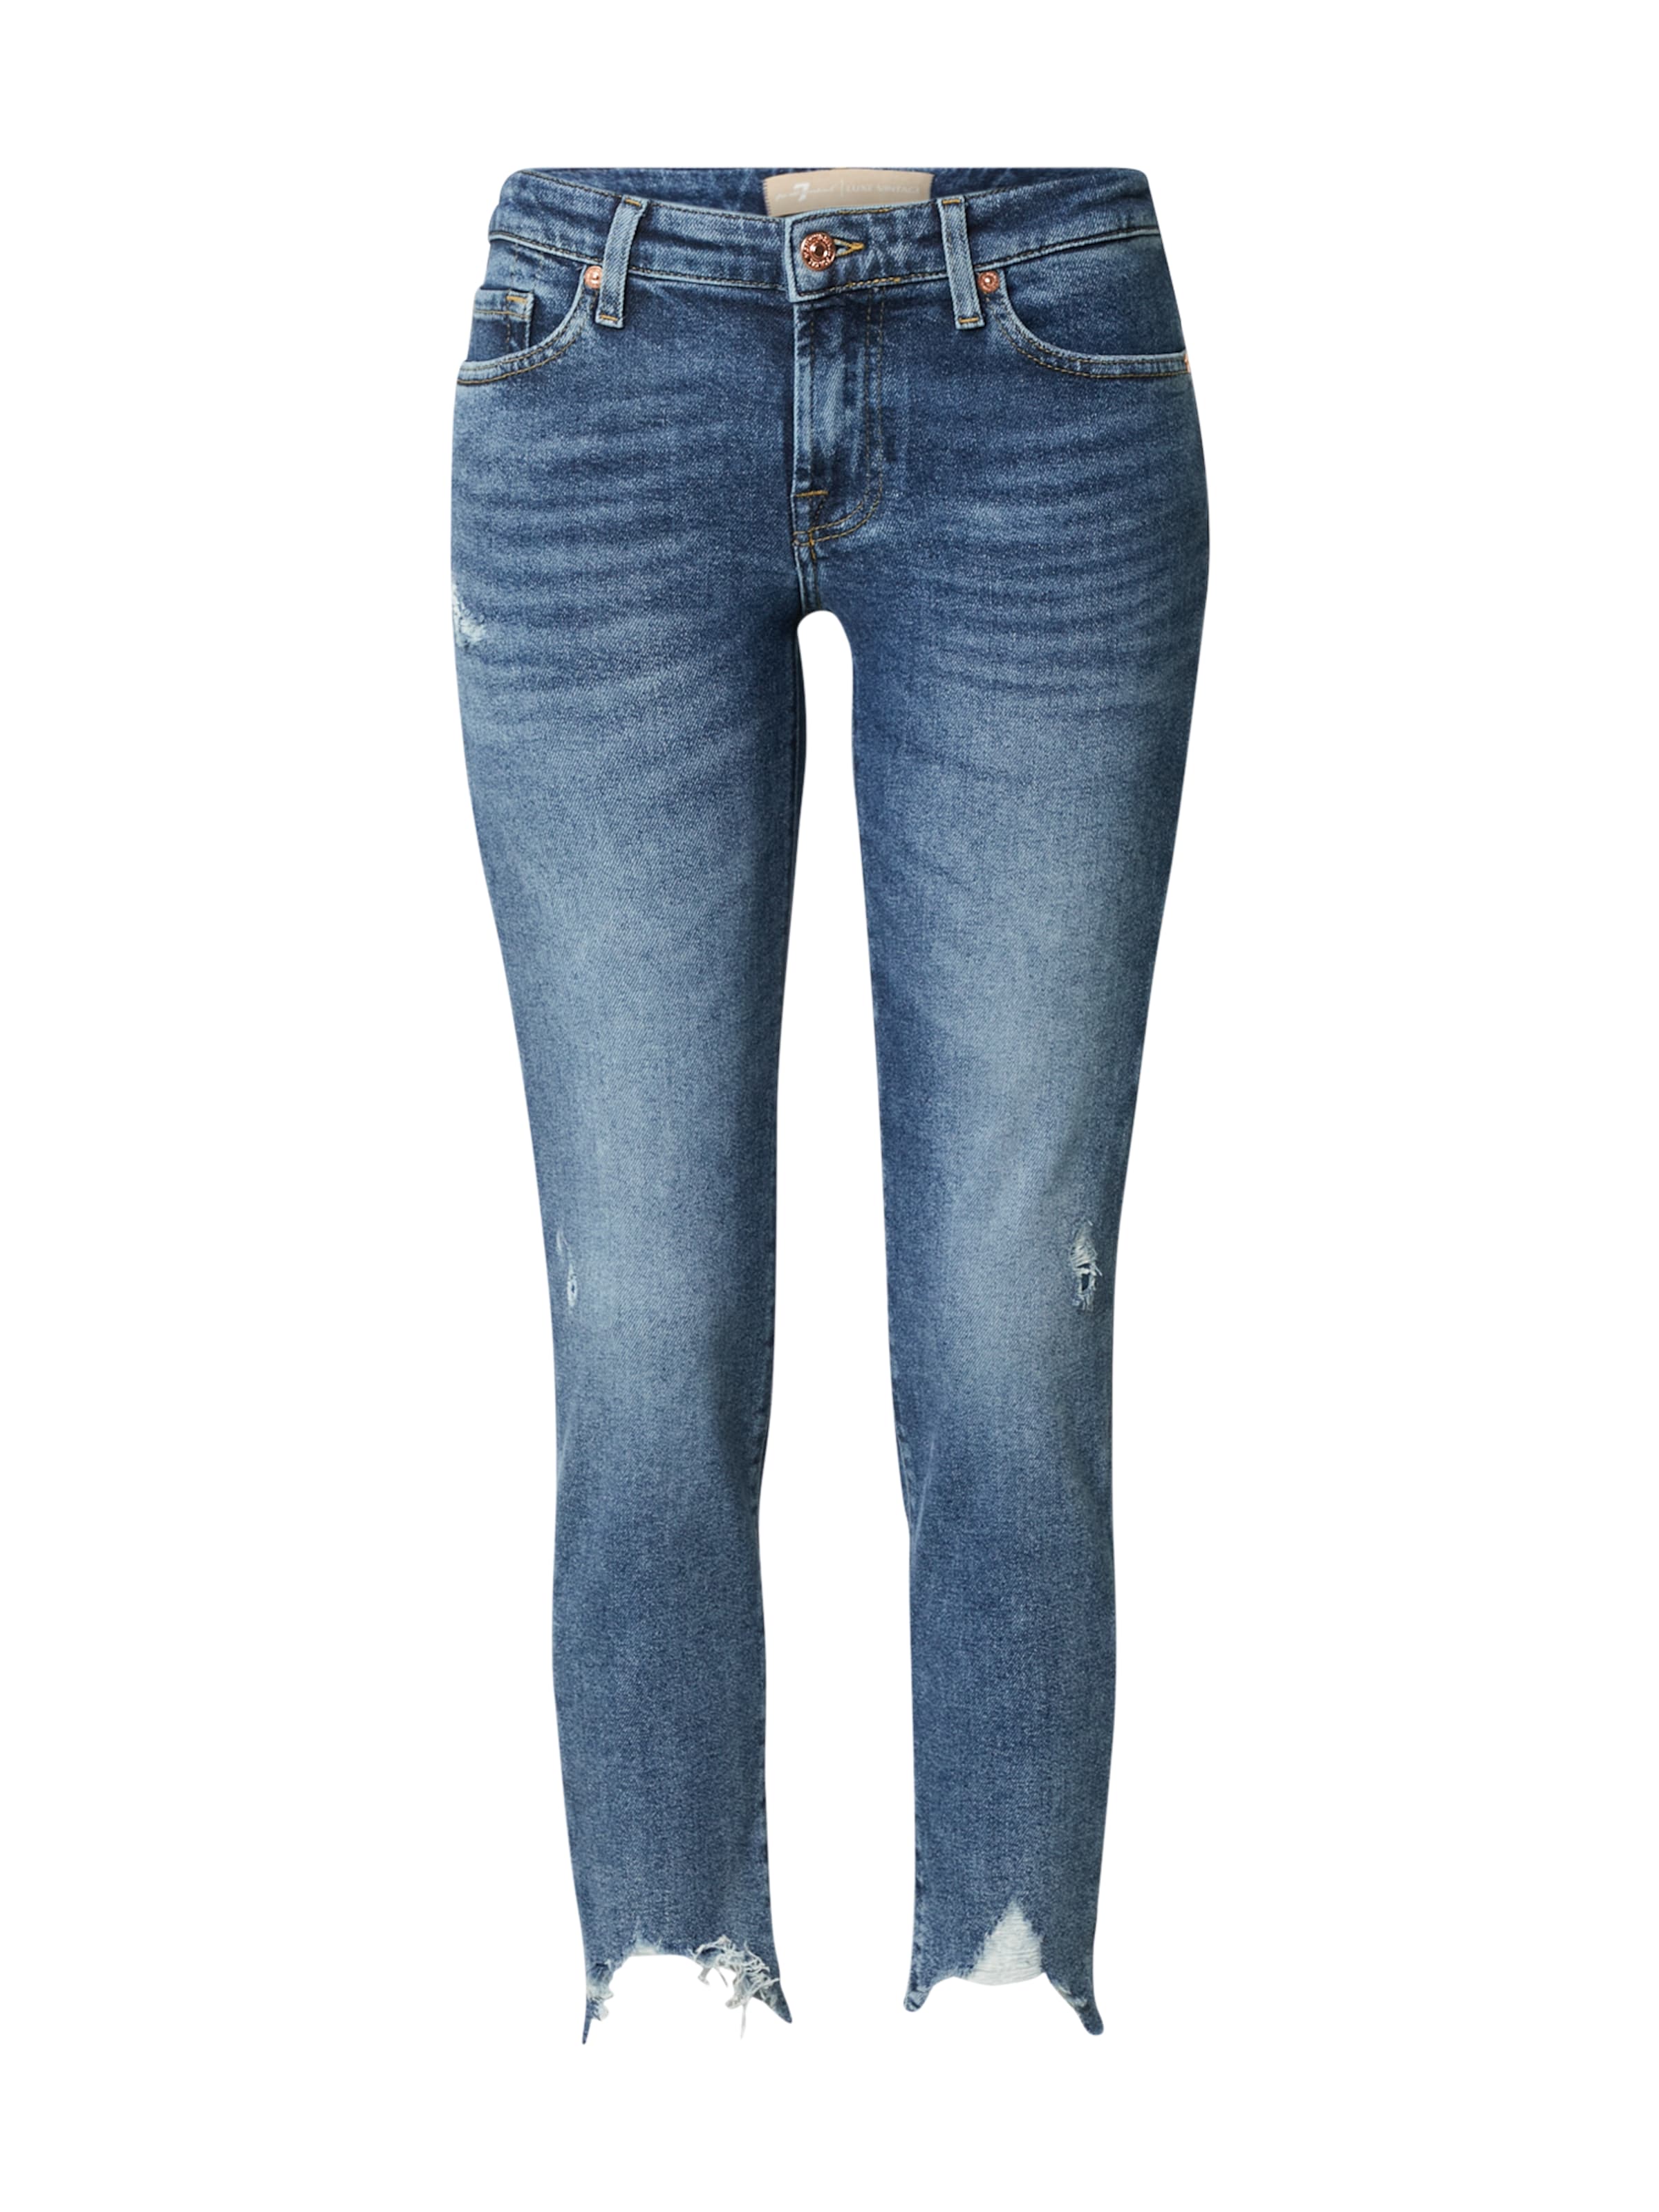 7 for all mankind Jeans PYPER in Blu 